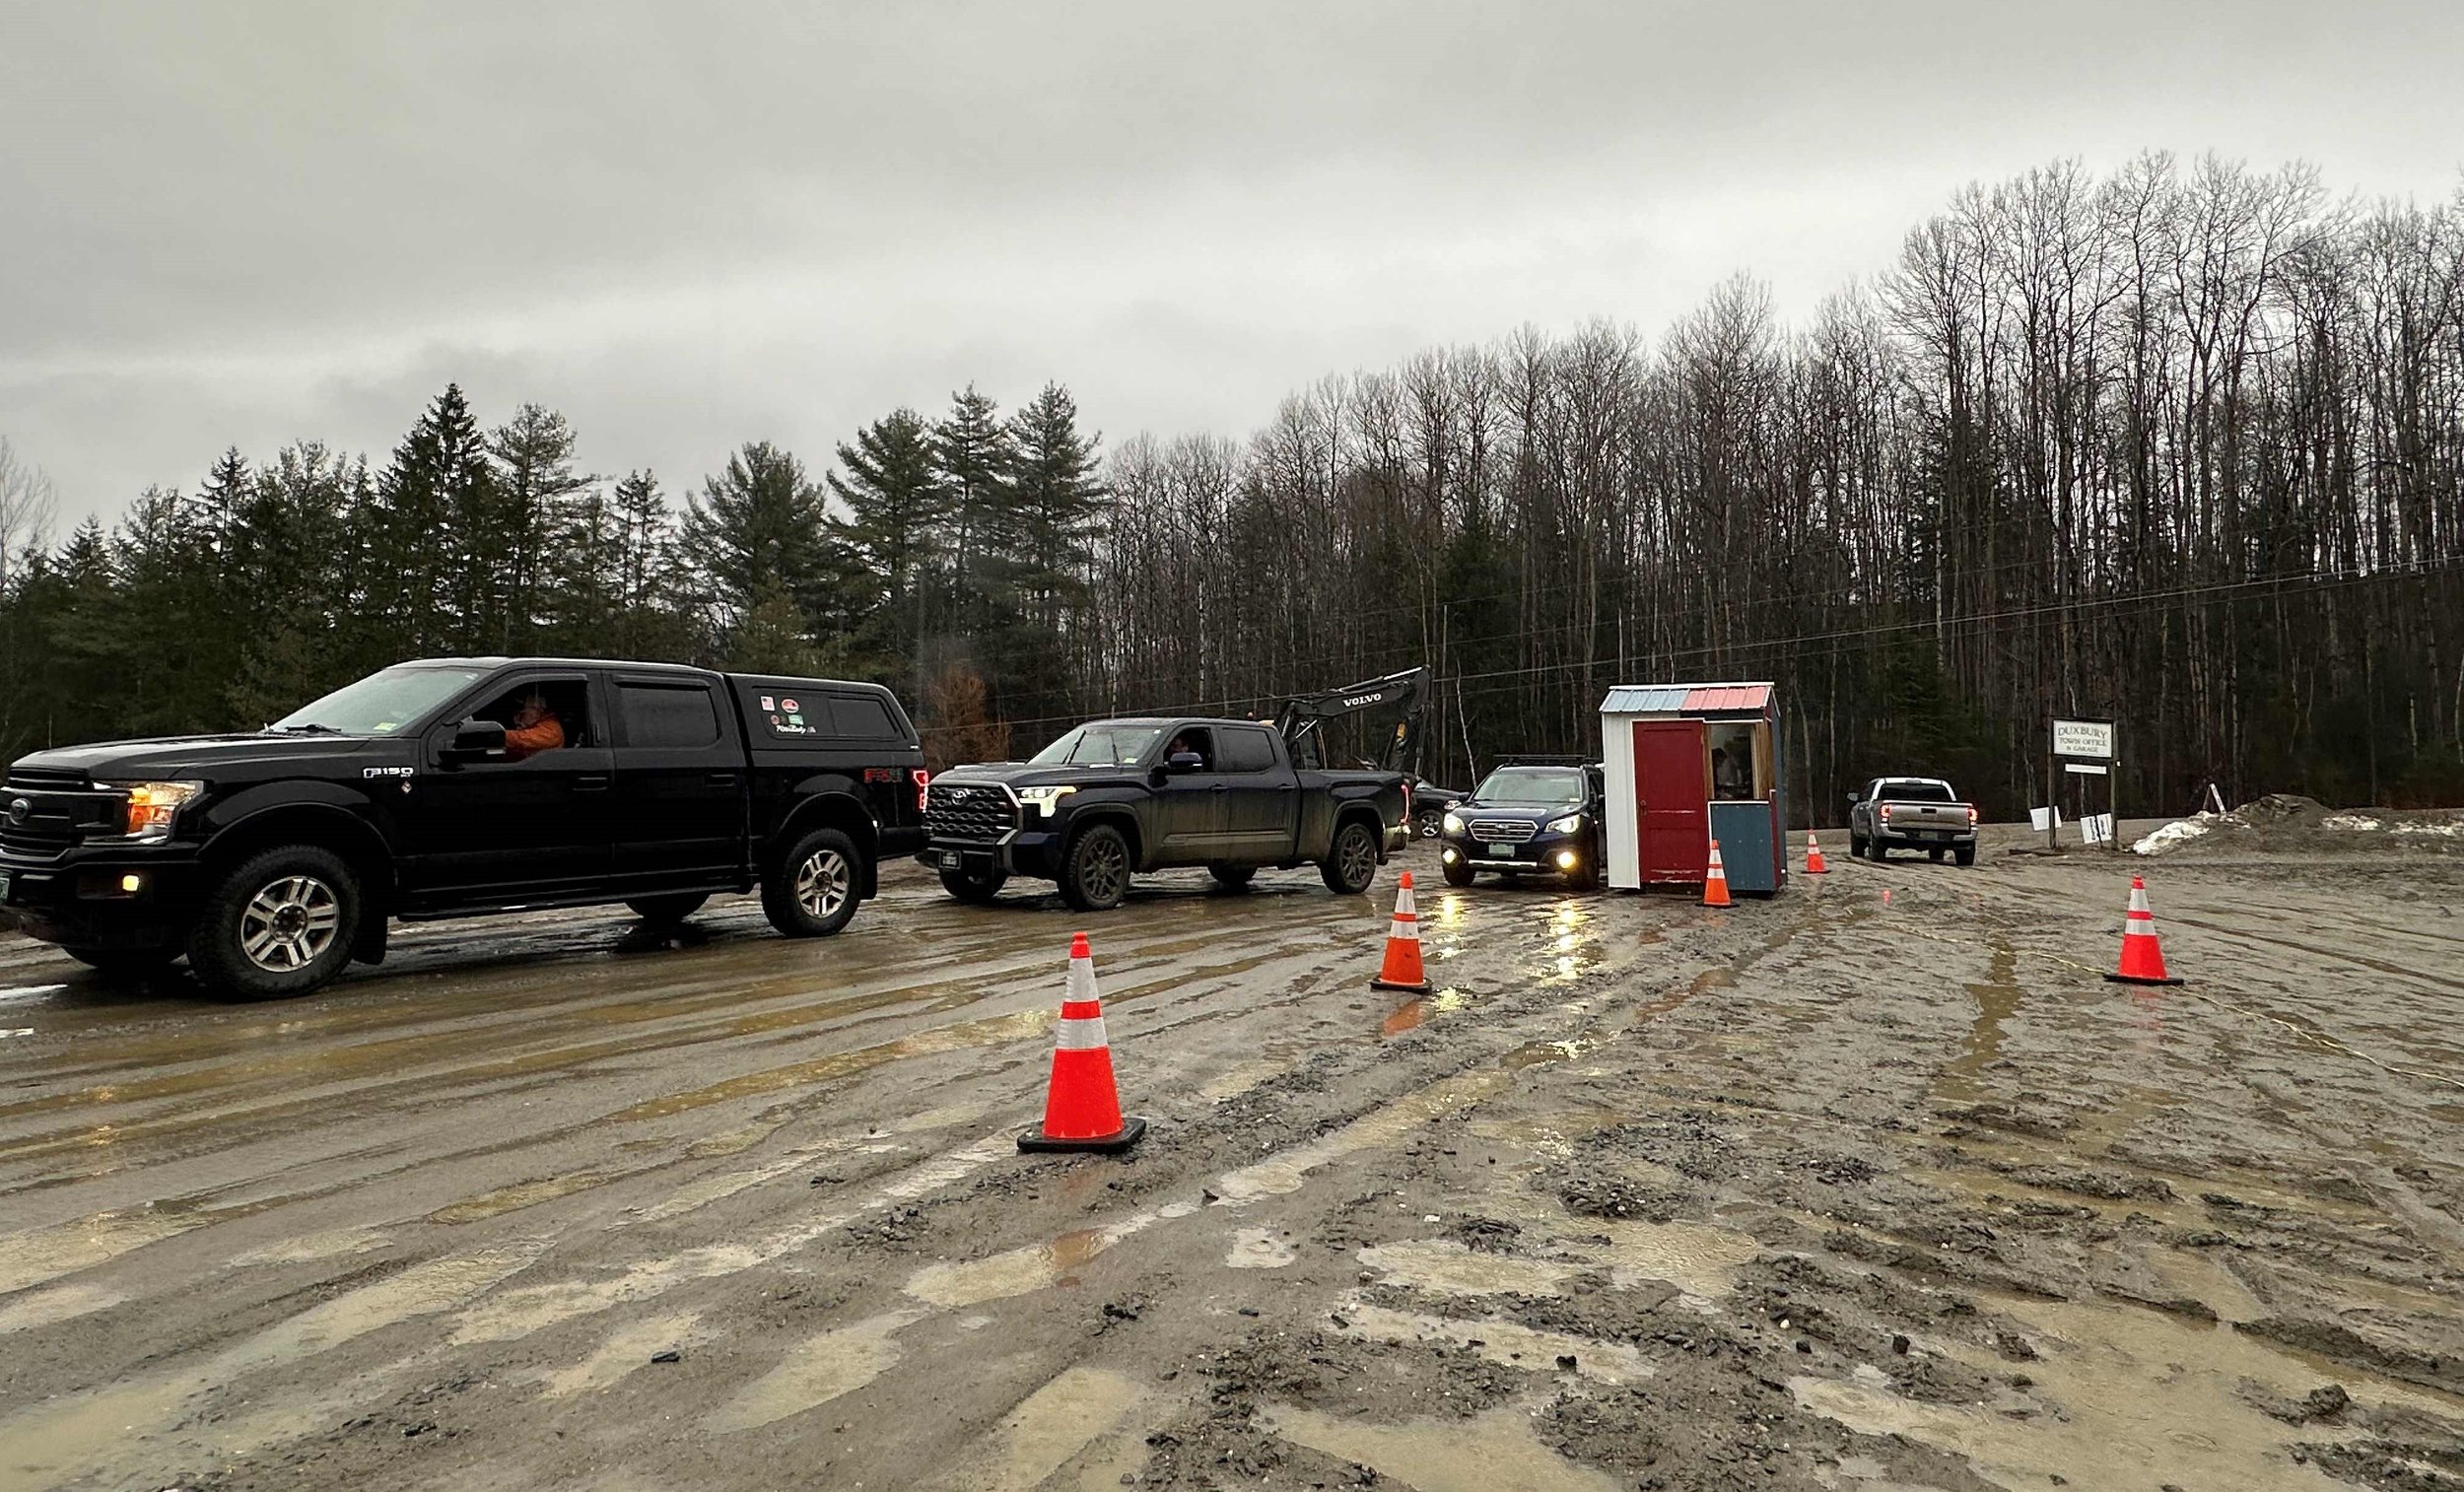   Voters stay in their vehicles to mark their ballots as they move through the voting loop. Photo by Lisa Scagliotti  